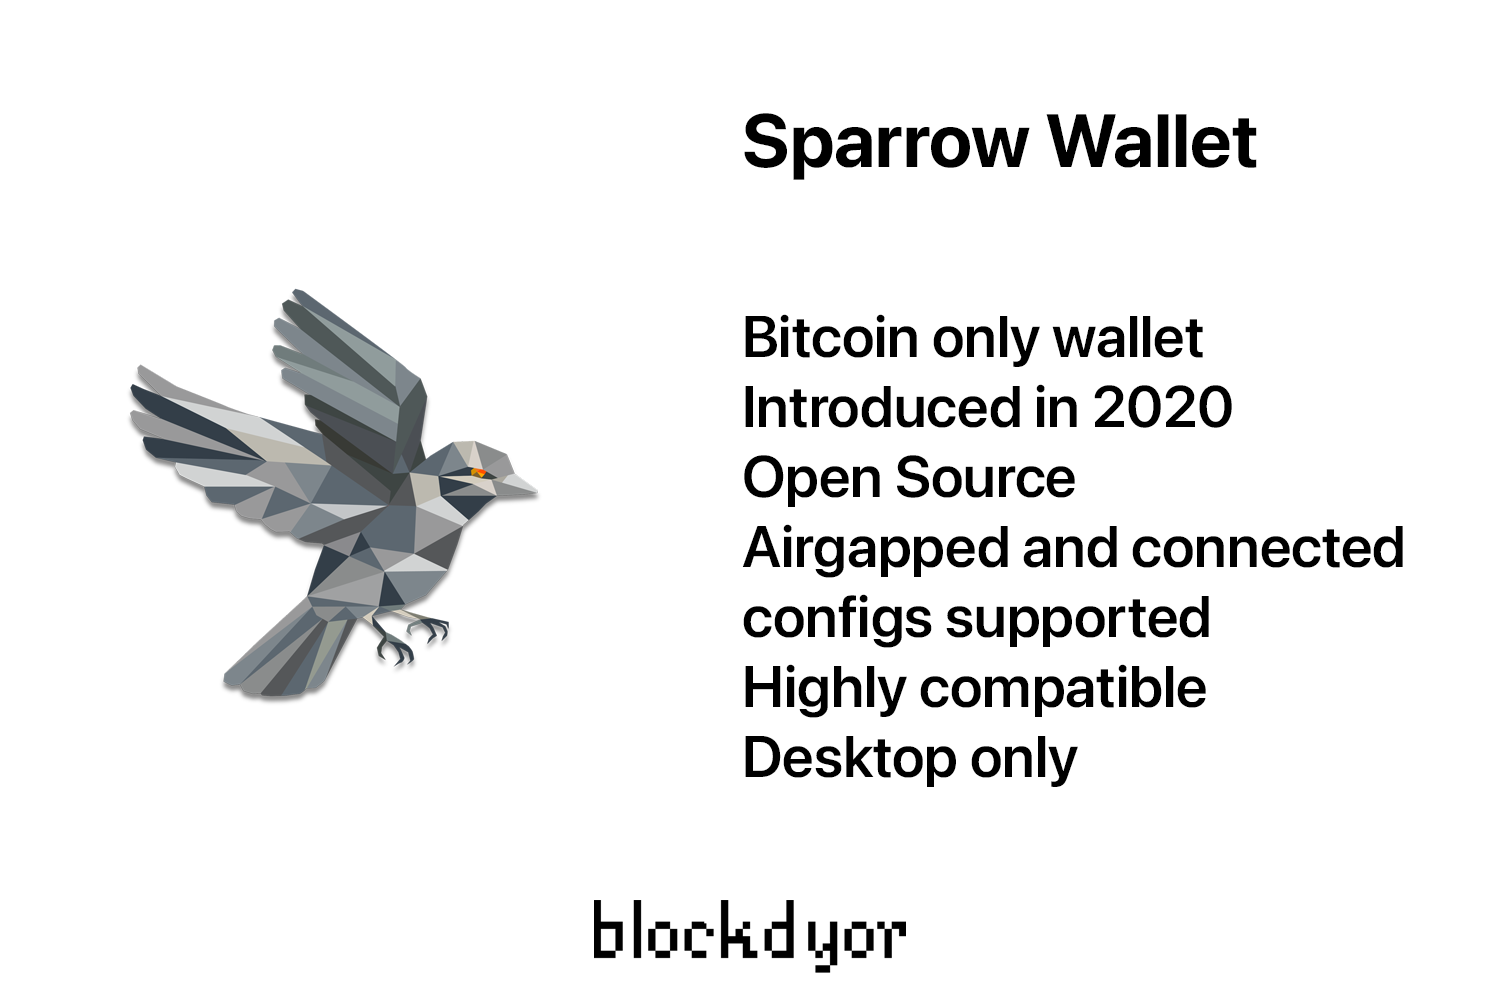 Sparrow Wallet Overview